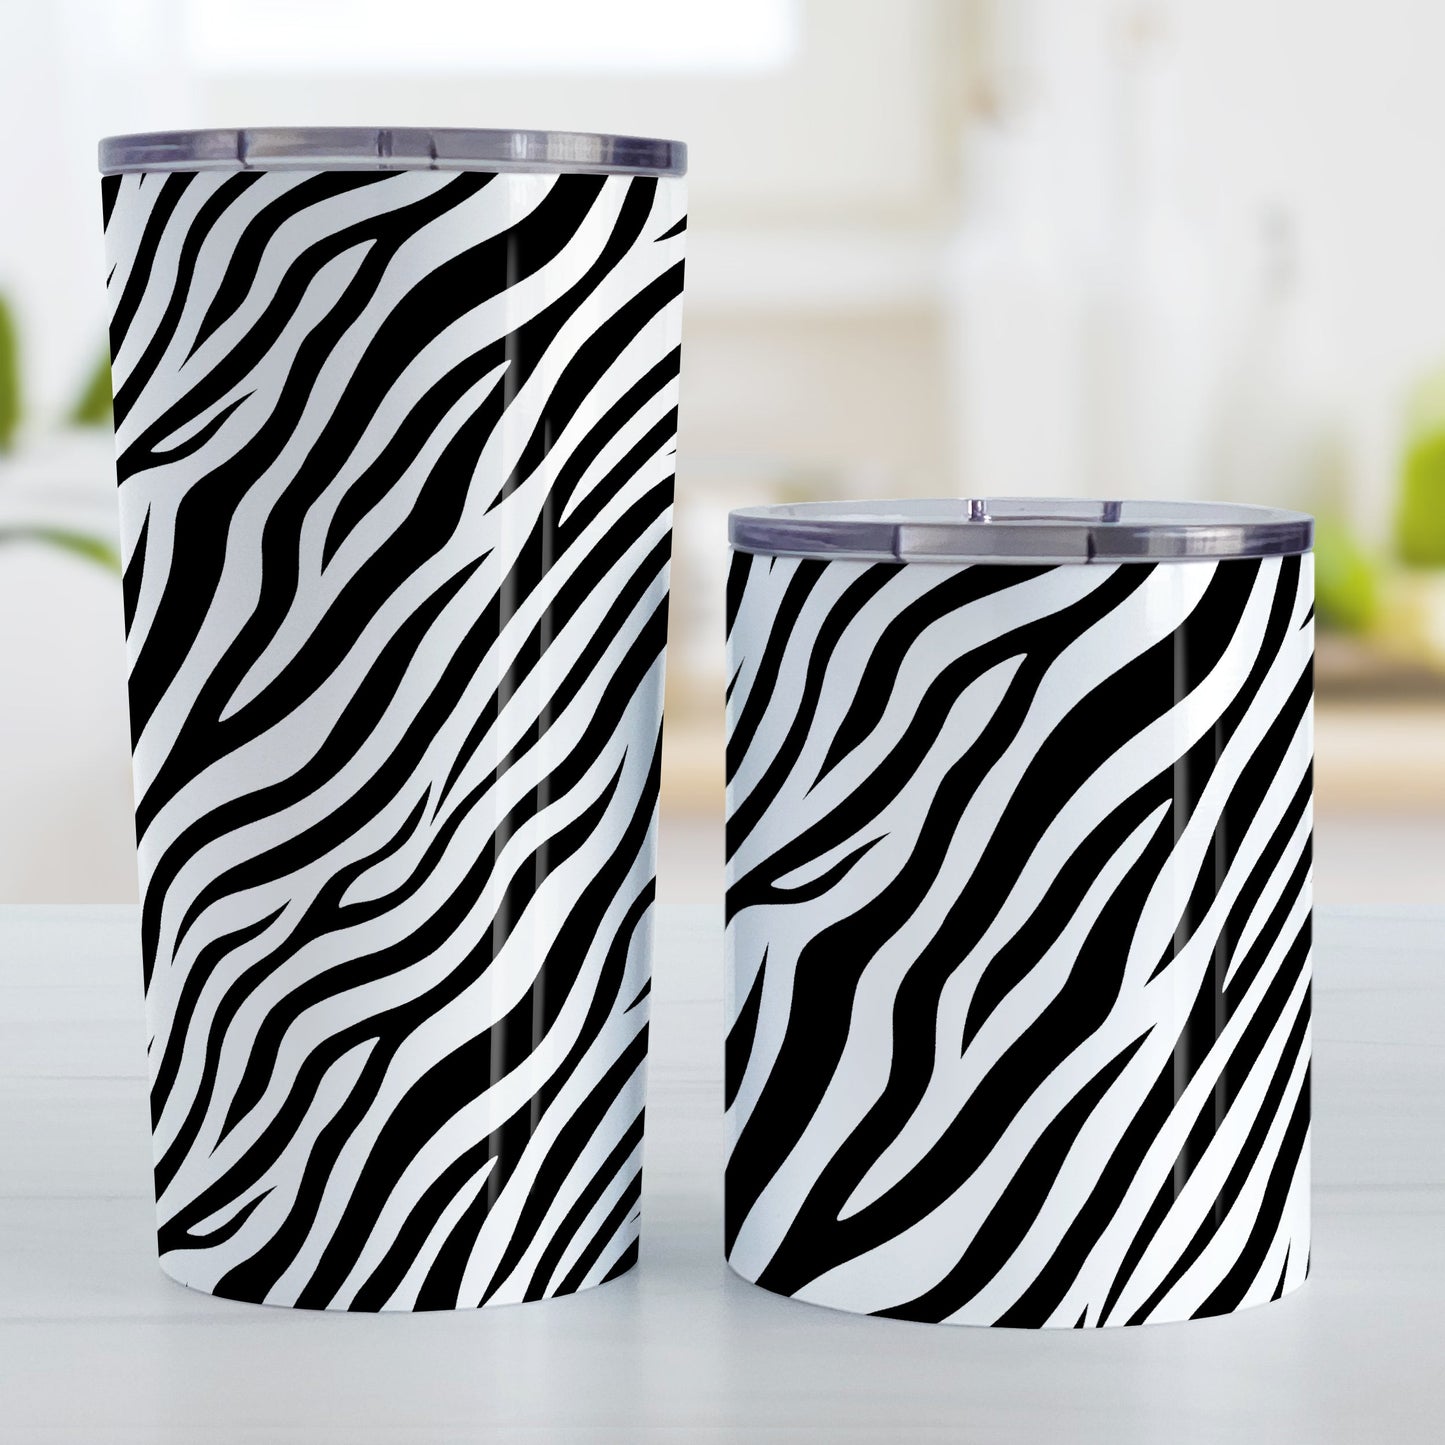 Zebra Print Pattern Tumbler Cup (20oz and 10oz, stainless steel insulated) at Amy's Coffee Mugs